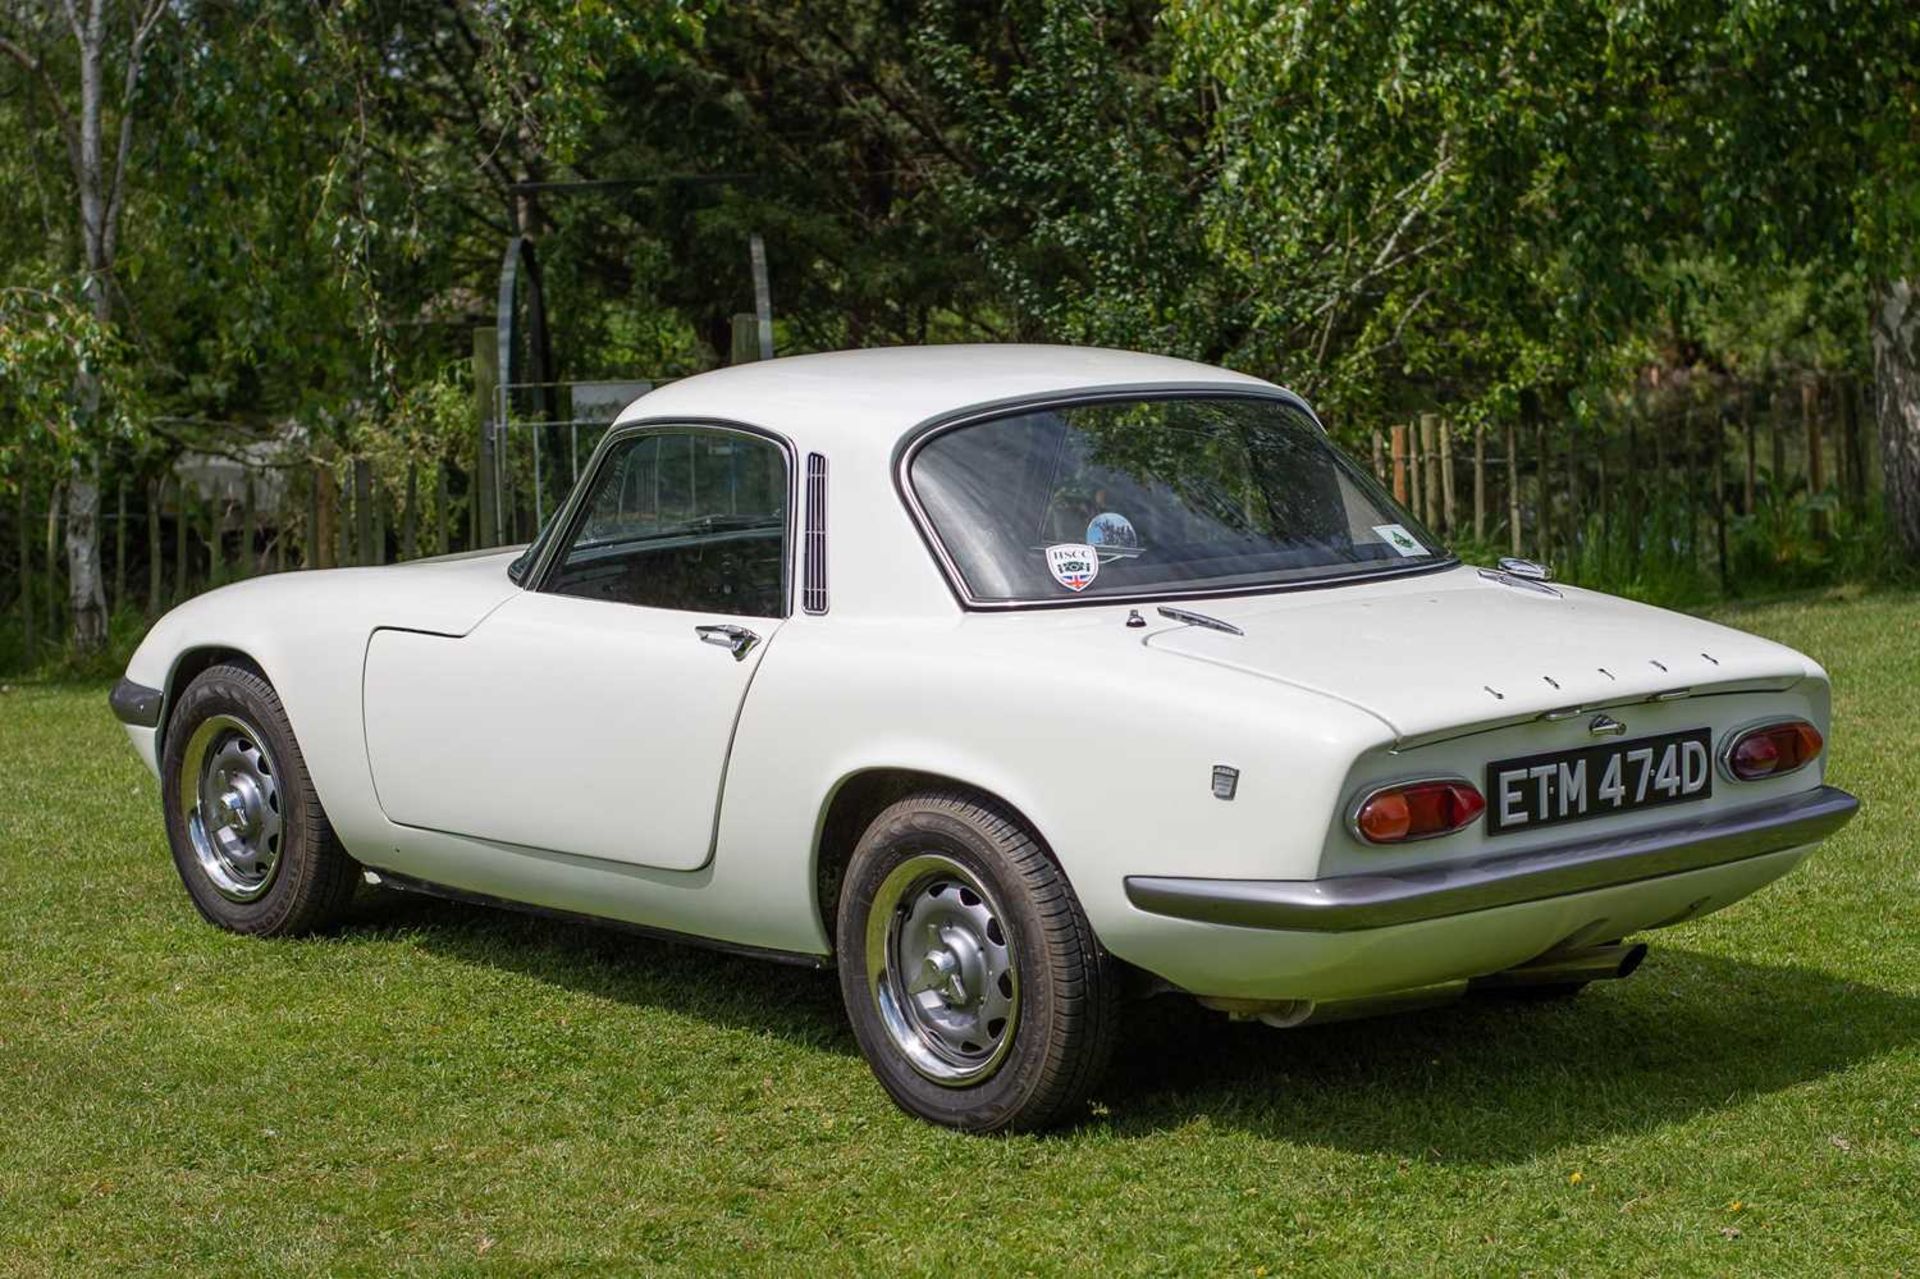 1966 Lotus Elan Fixed Head Coupe Sympathetically restored, equipped with desirable upgrades - Image 14 of 100